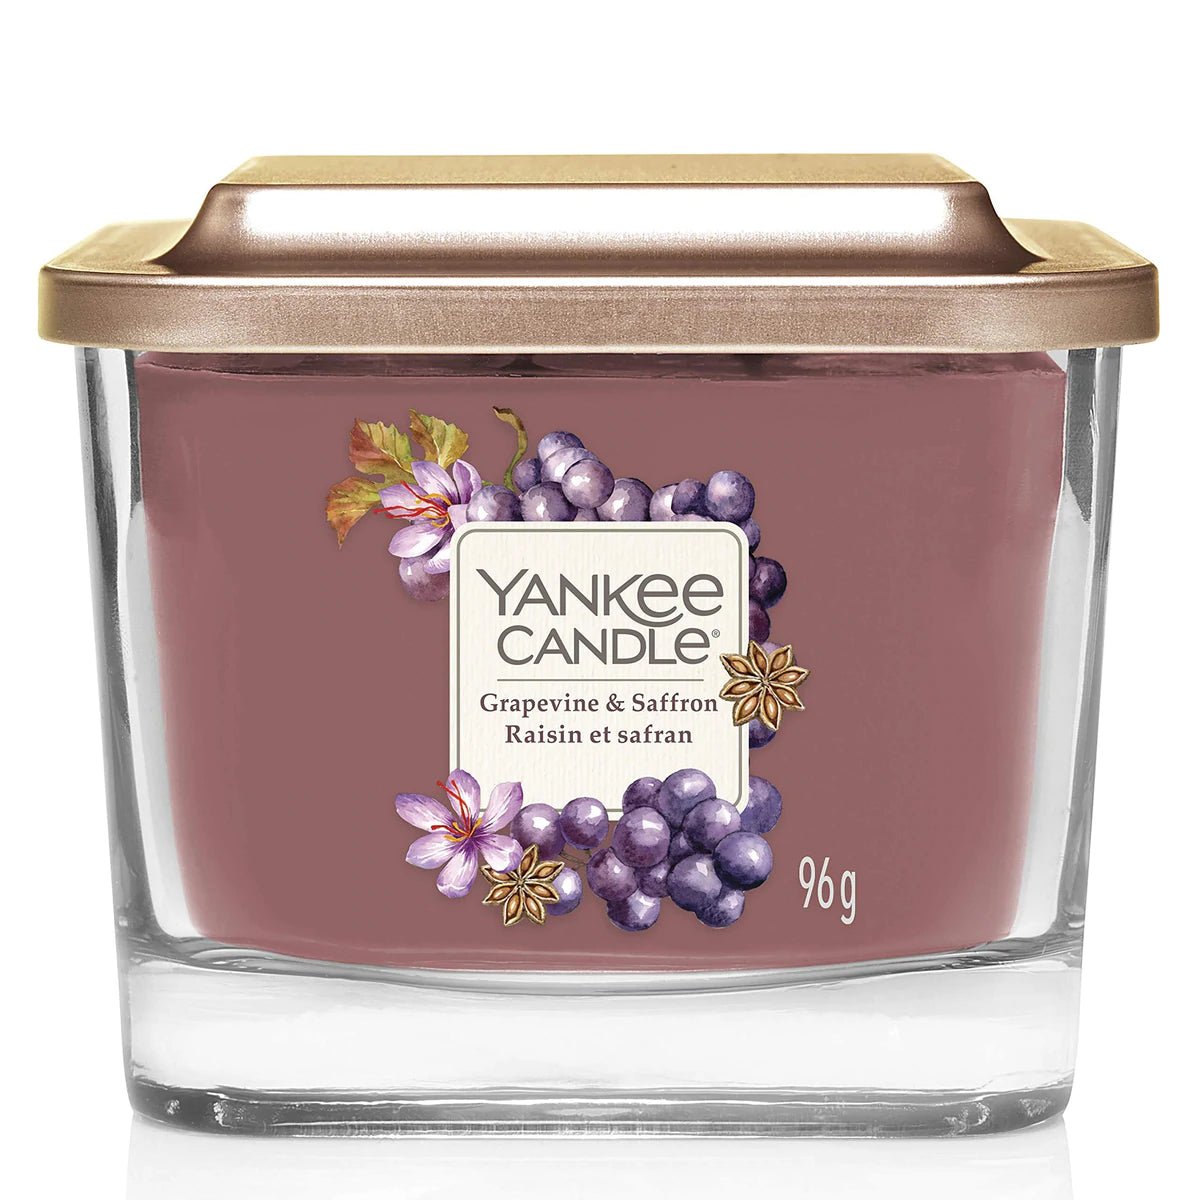 Yankee Candle Elevation Small Square Vessel Grapevine & Saffron 96 G - AllurebeautypkYankee Candle Elevation Small Square Vessel Grapevine & Saffron 96 G